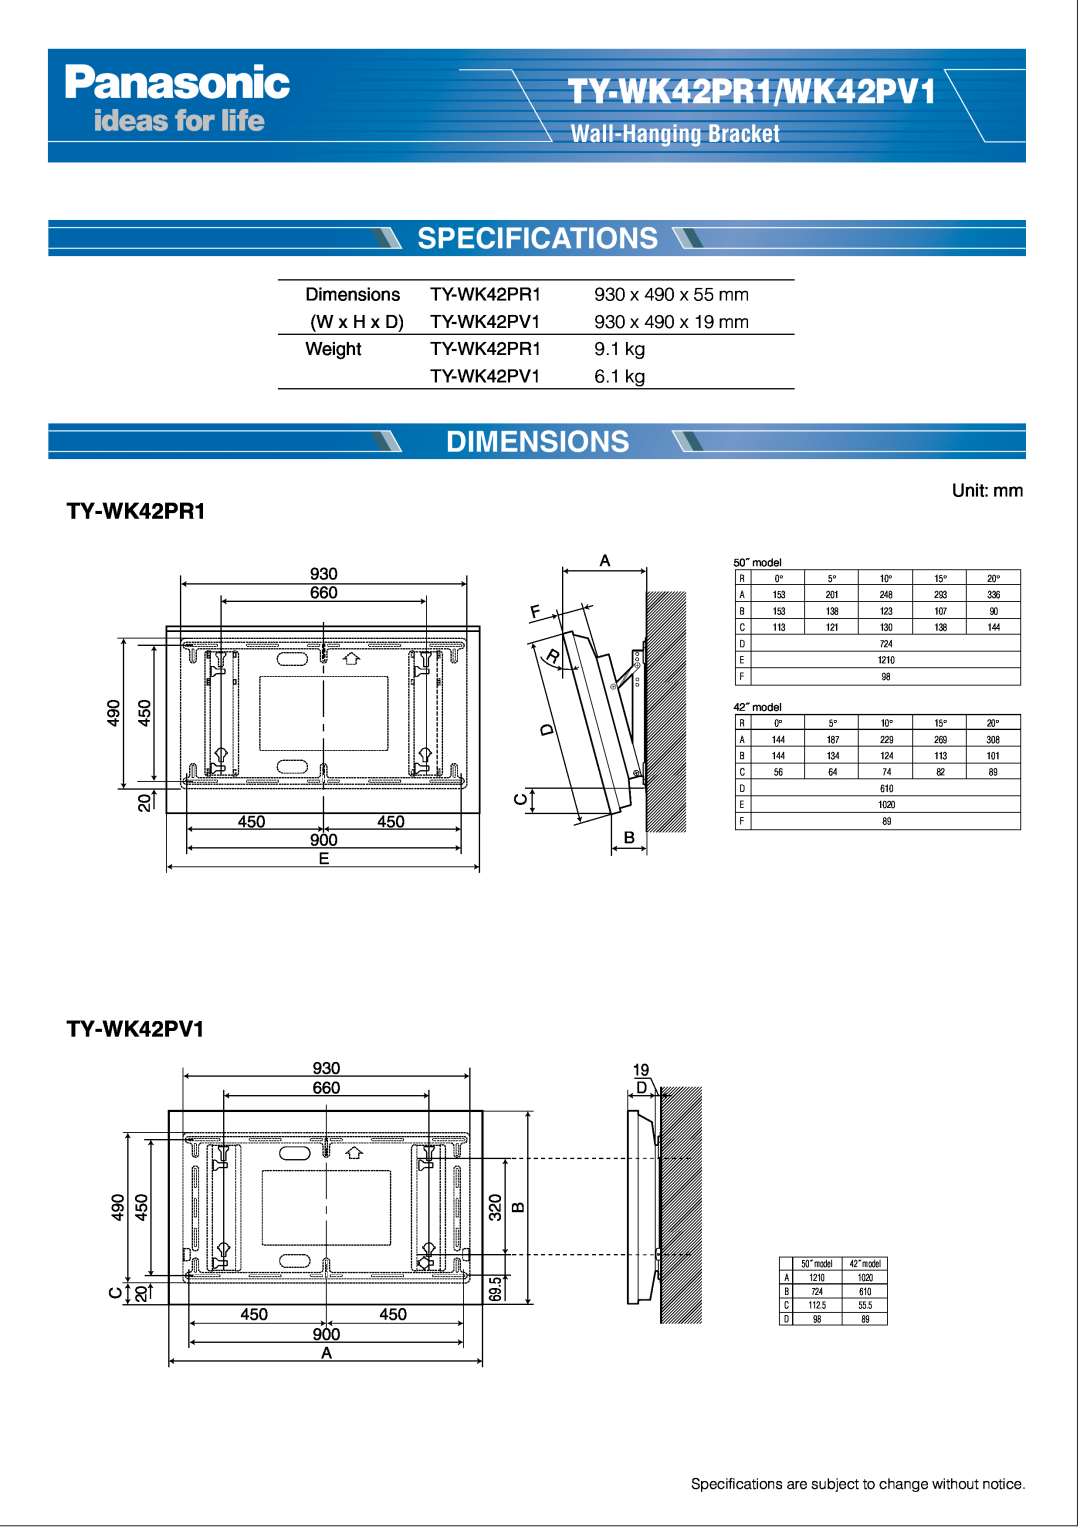 Panasonic specifications TY-WK42PR1/WK42PV1, Specifications, Dimensions, Wall-Hanging Bracket, TY-WK42PV1 